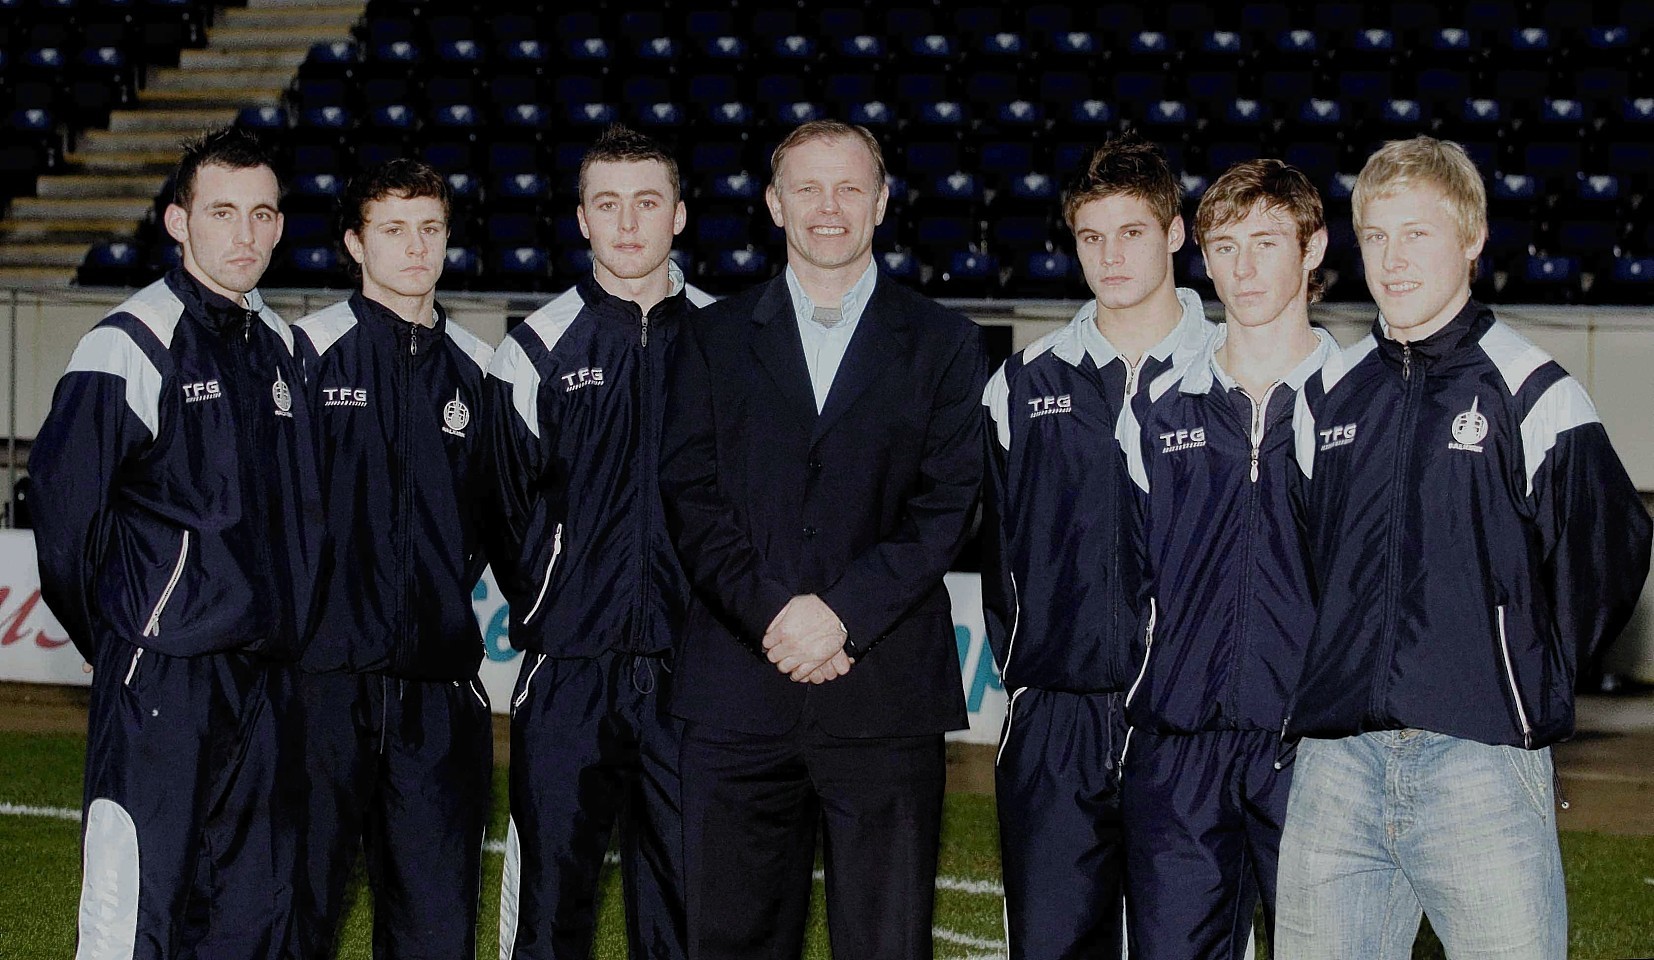 Mark Stewart, now at Raith Rovers, was one of a number of youth team players Hughes introduced into the Falkirk first team